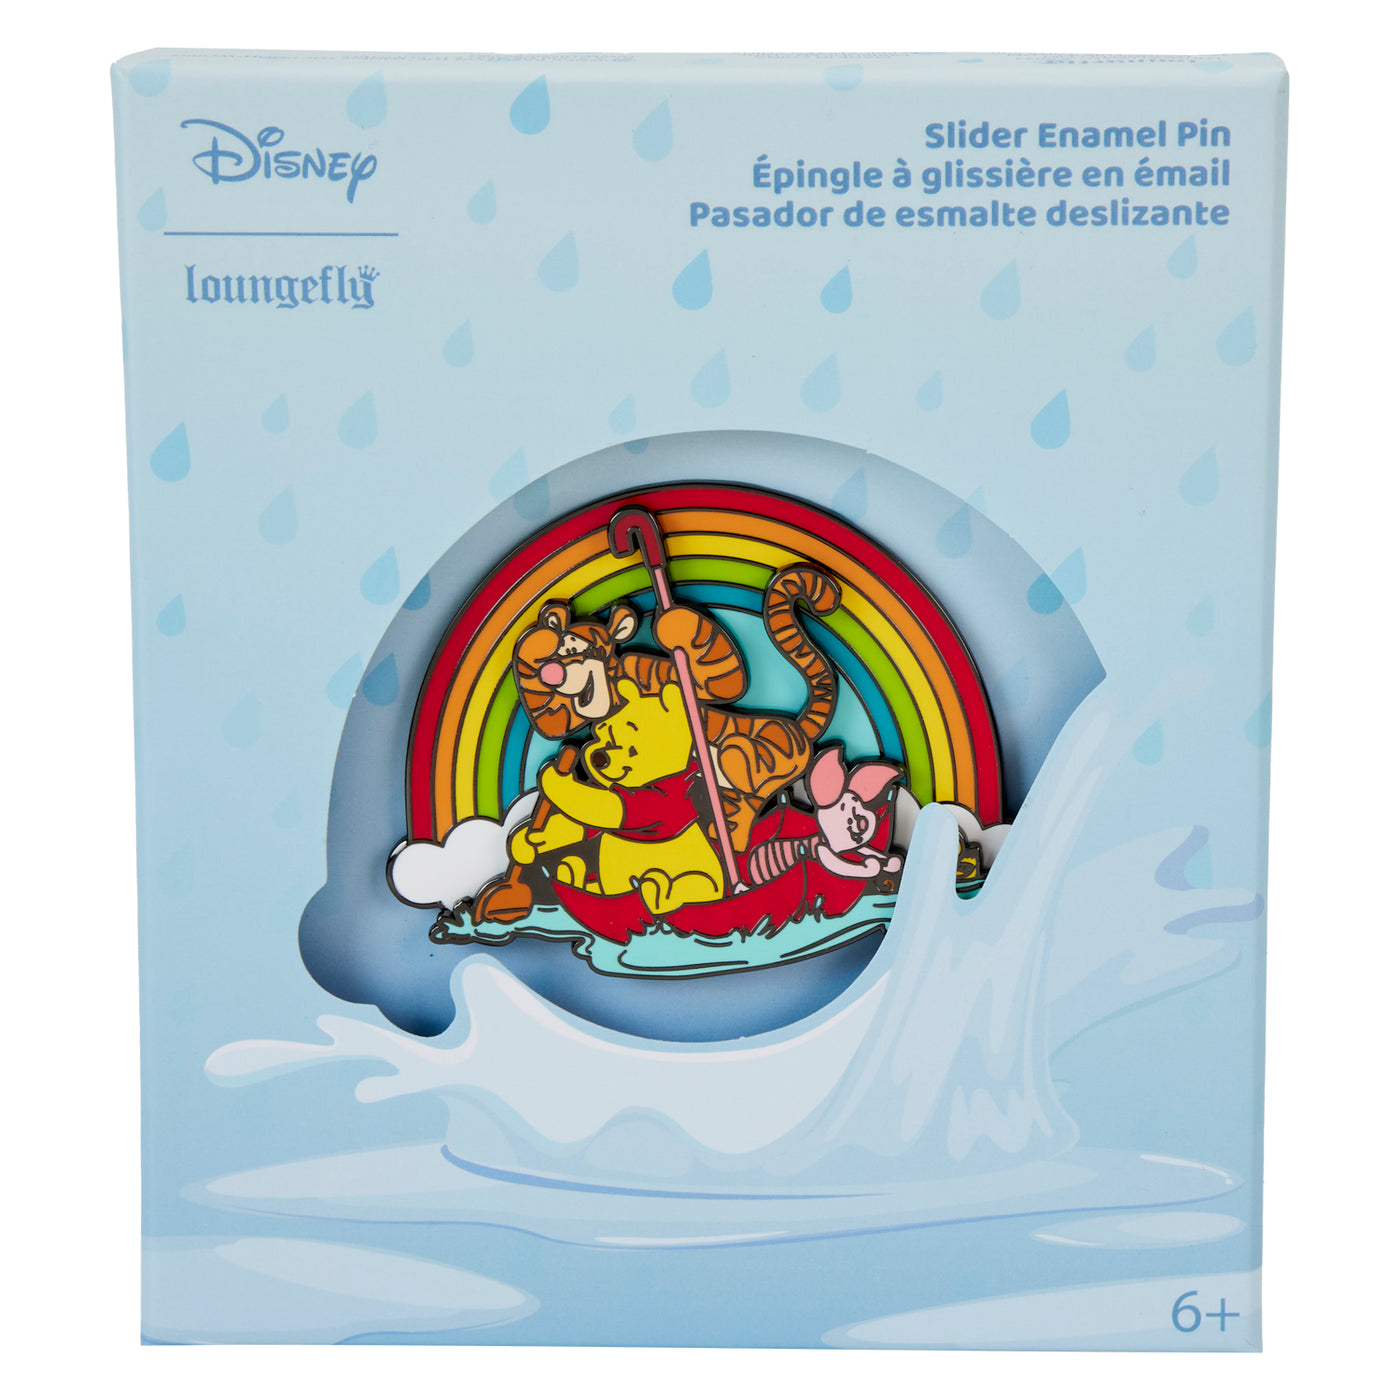 Disney Winnie the Pooh Rainy Day 3" Collector Box Limited Edition Pin